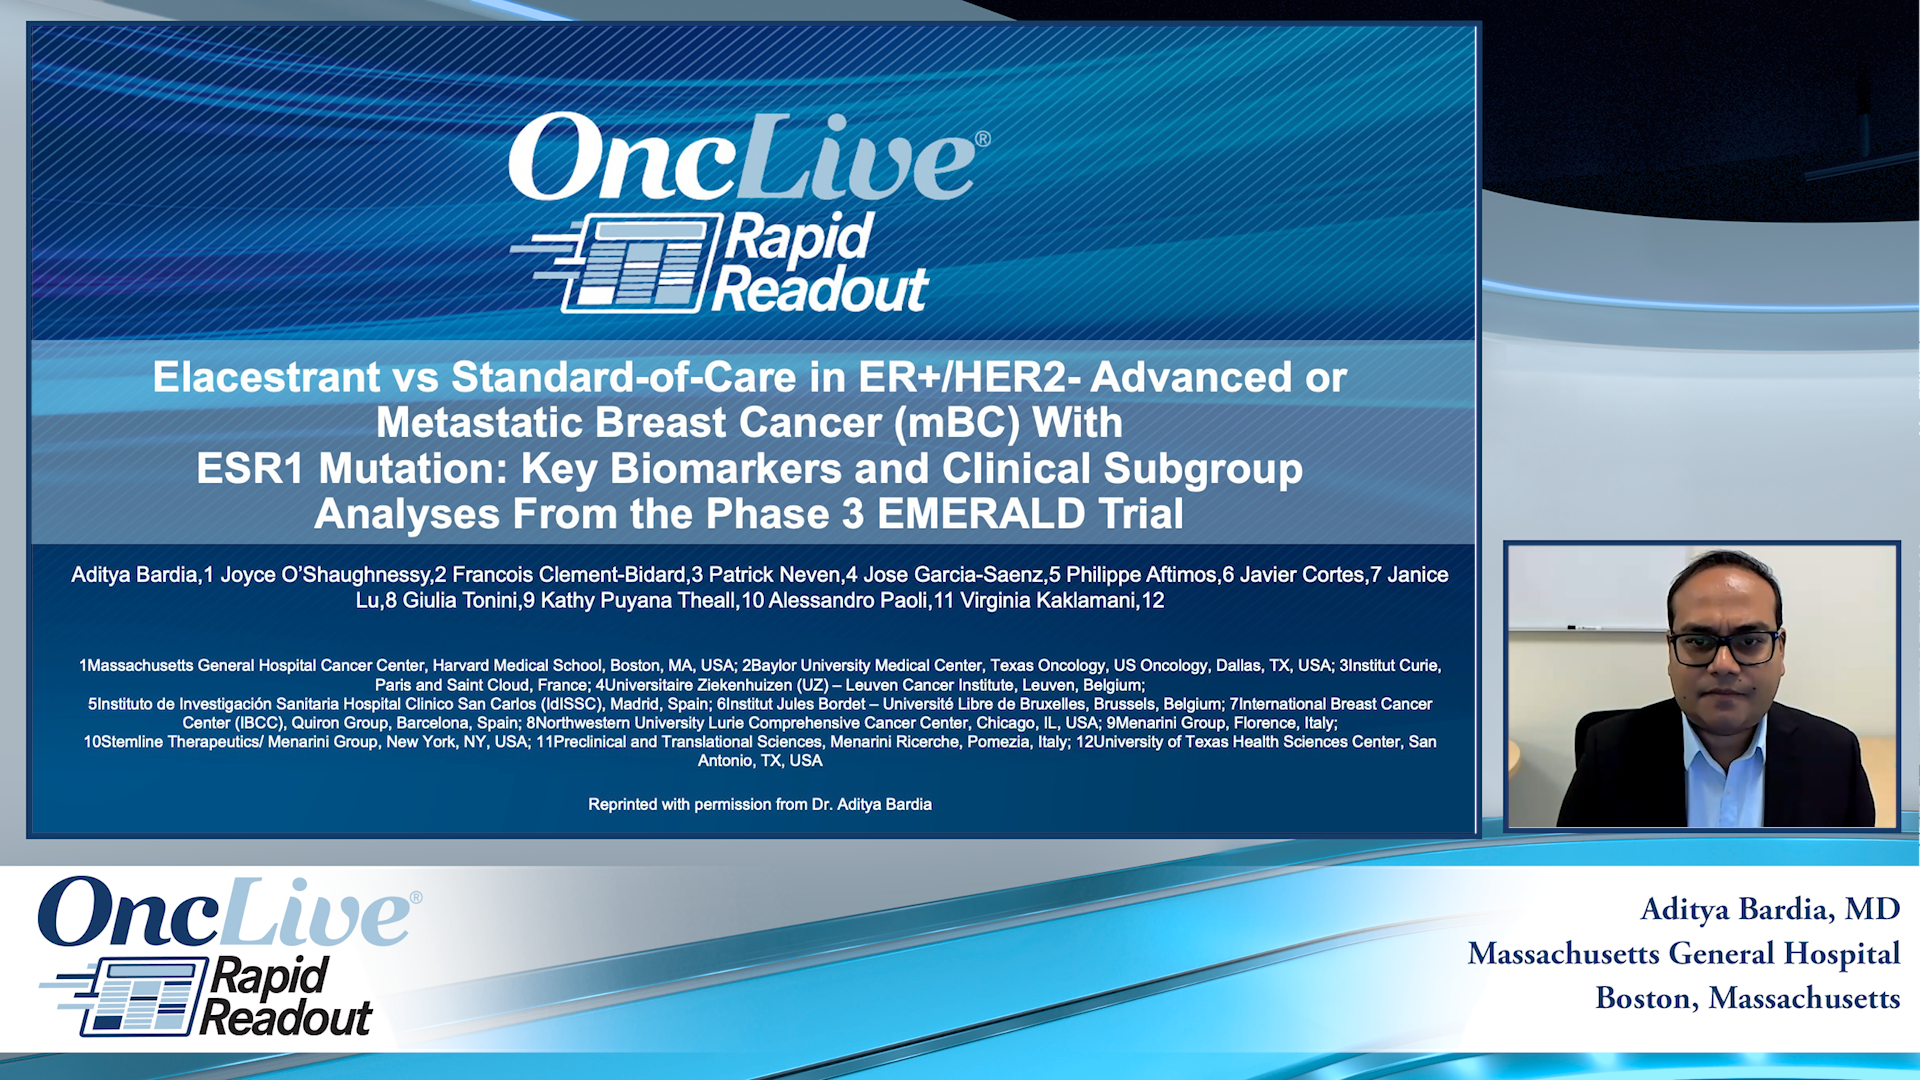 Elacestrant vs Standard-of-Care in ER+/HER2- Advanced or Metastatic Breast Cancer (mBC) With ESR1 Mutation: Key Biomarkers and Clinical Subgroup Analyses From the Phase 3 EMERALD Trial